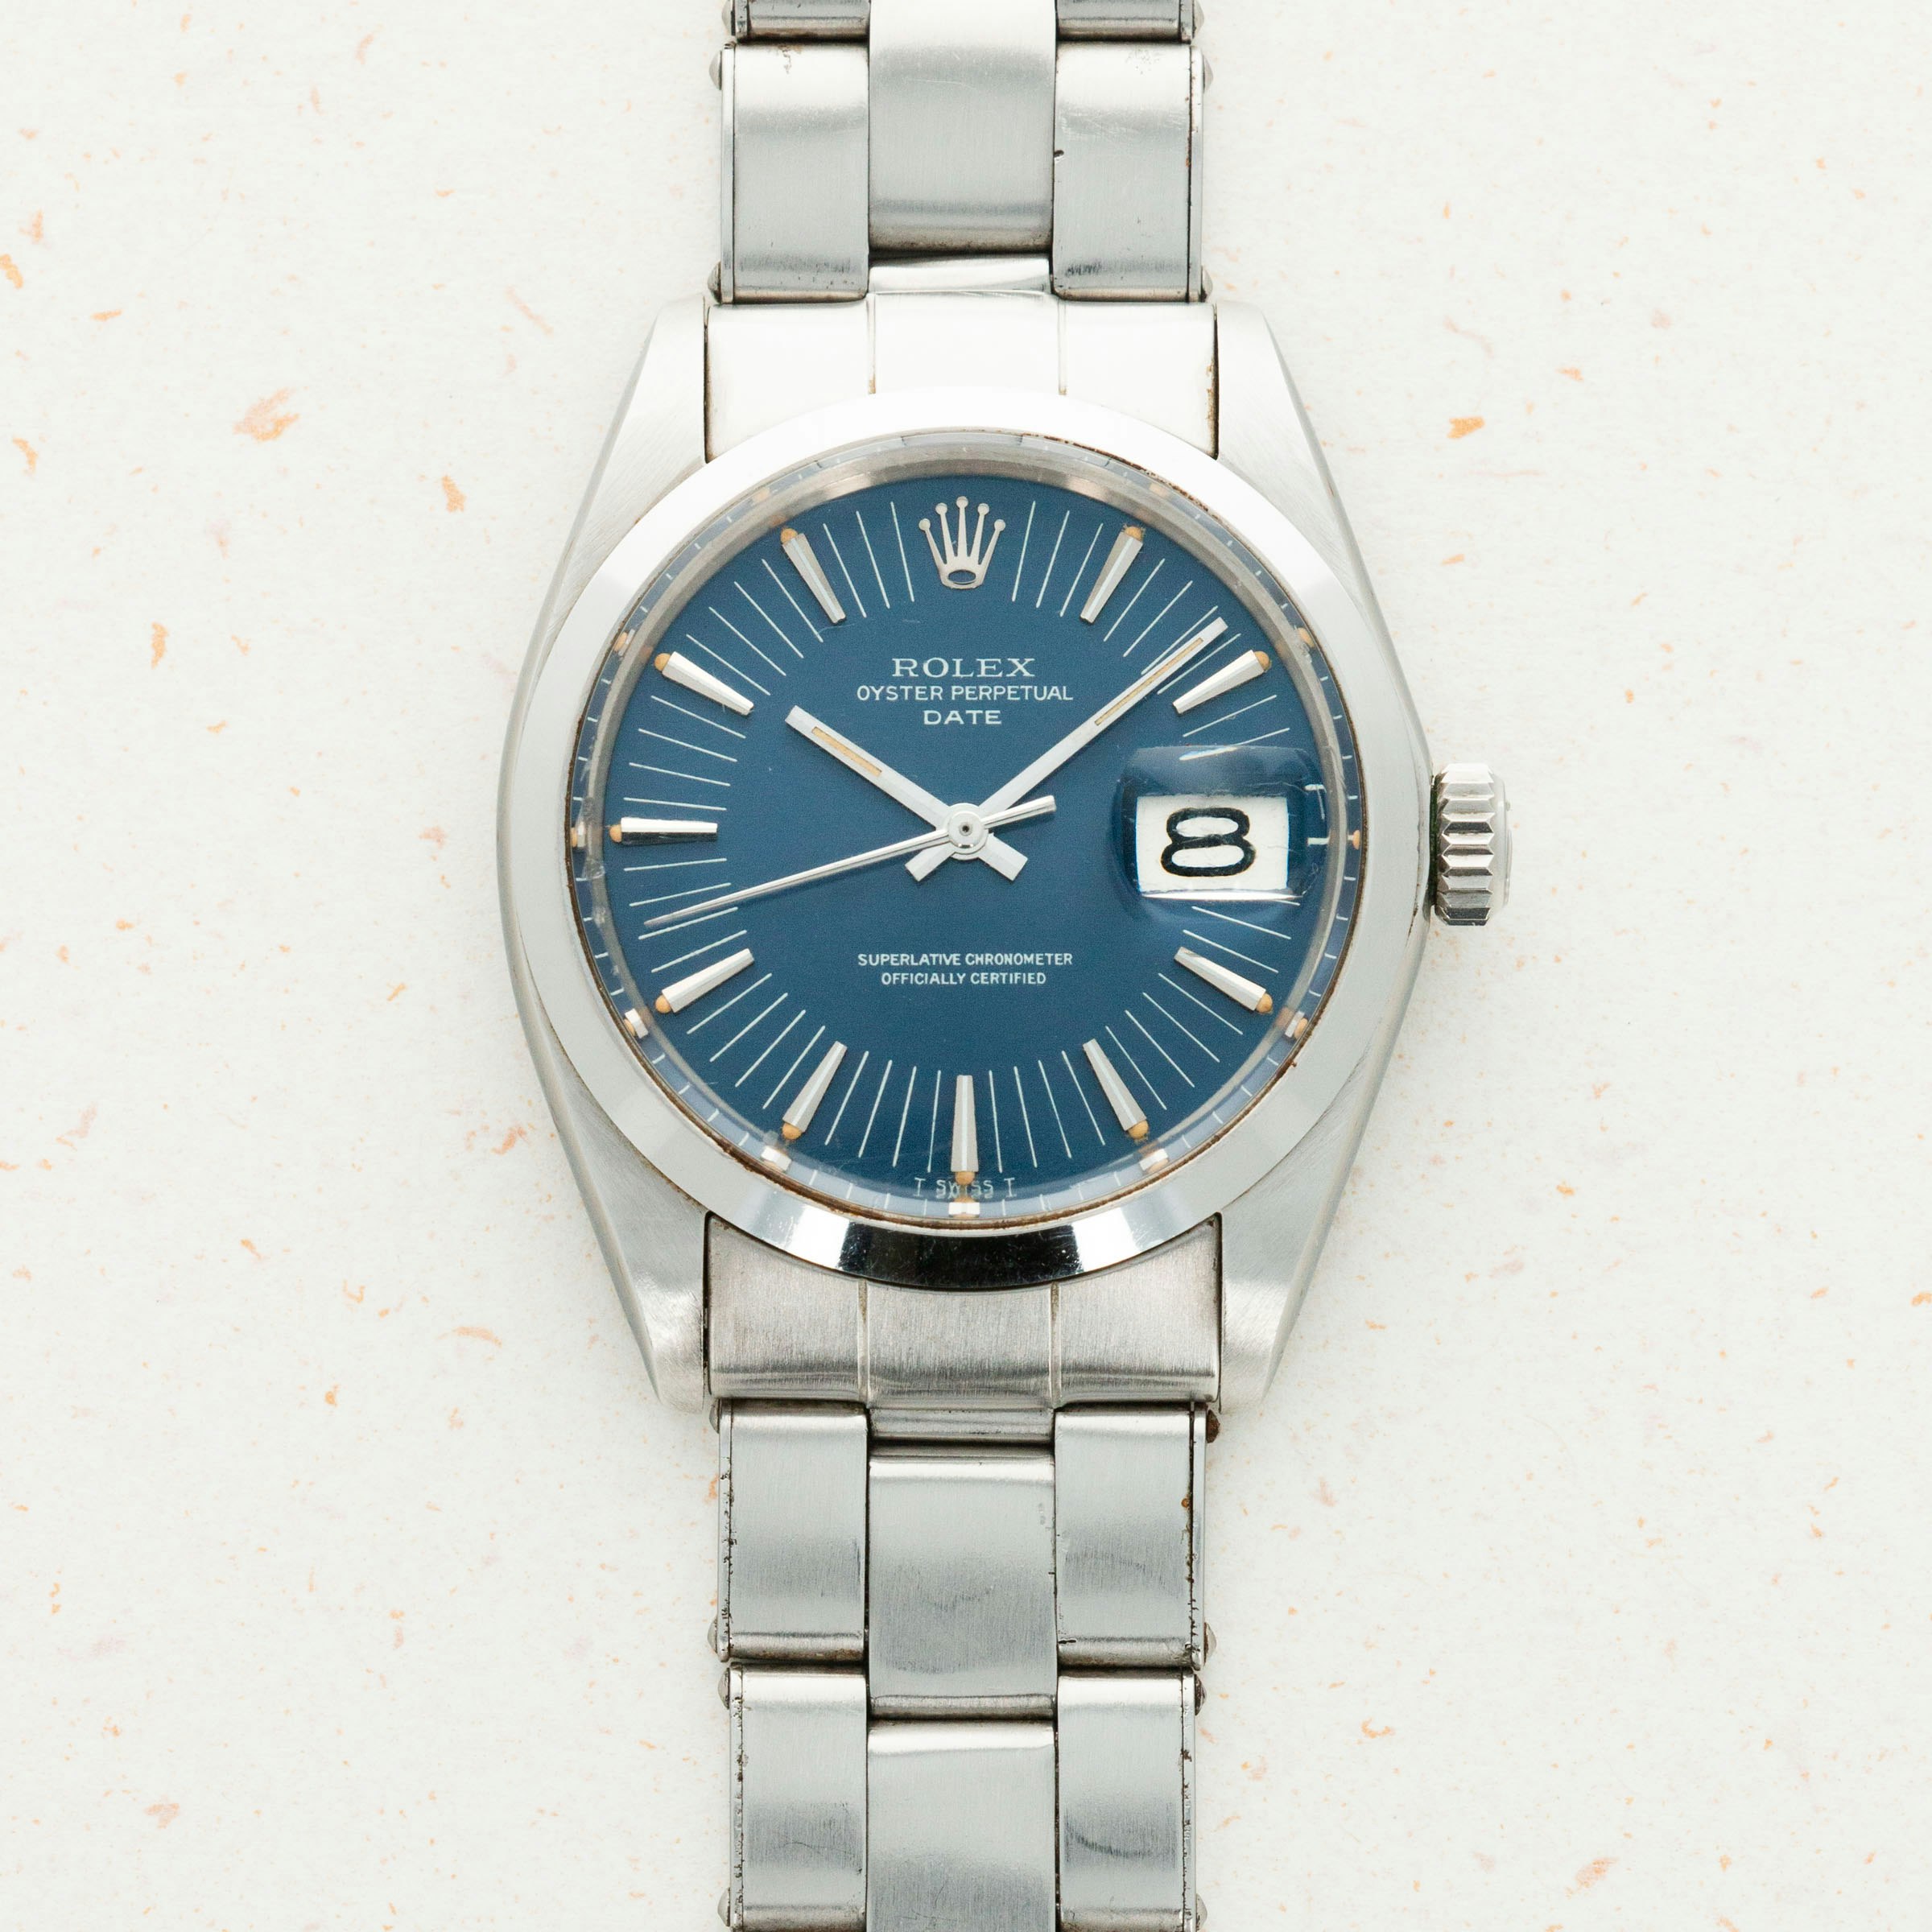 Thumbnail for Rolex Oyster Perpetual Date Long Index 1500